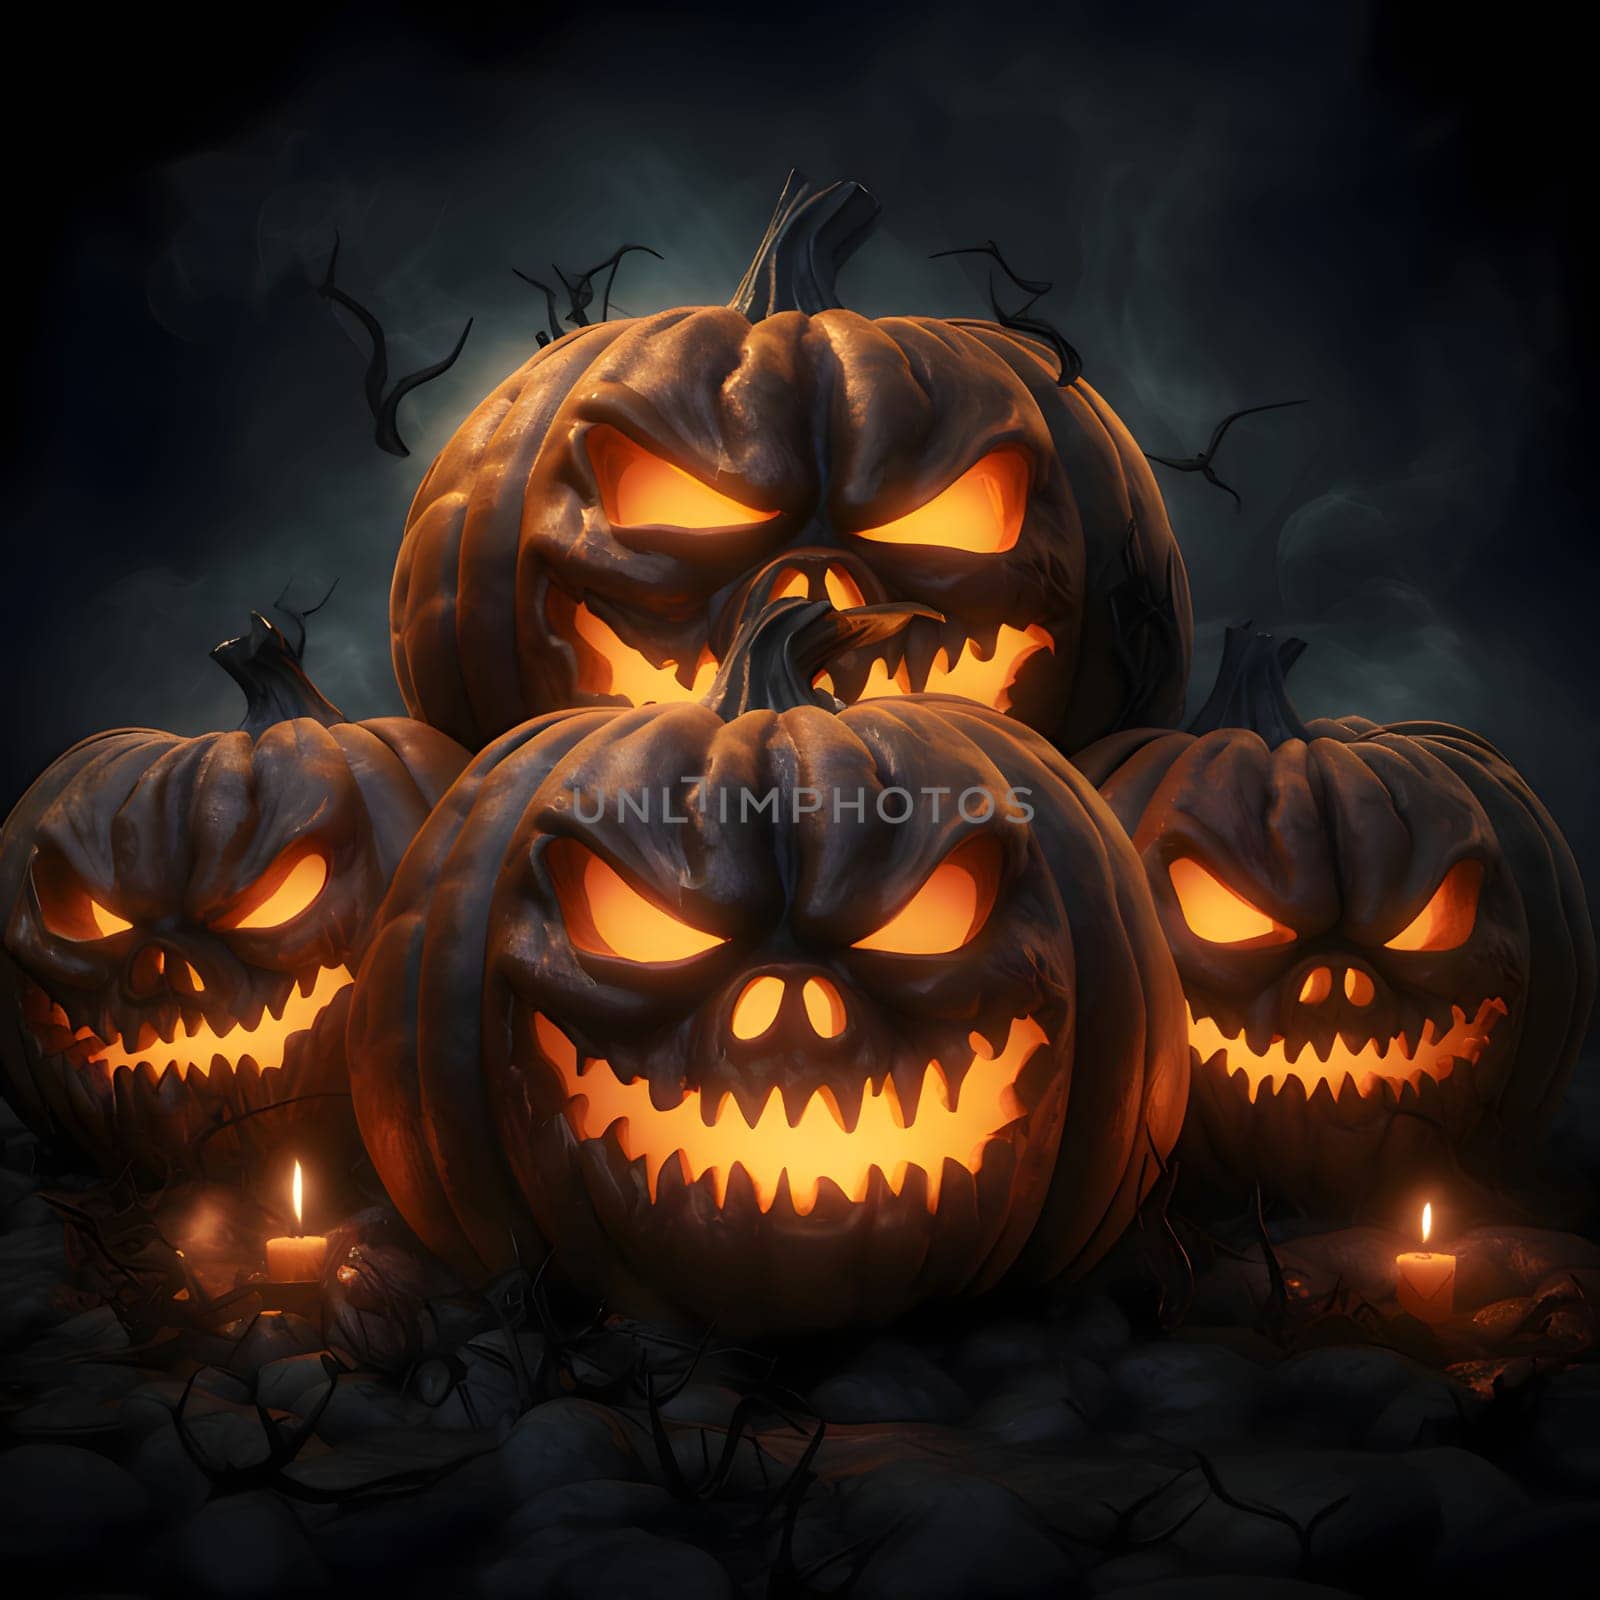 Four dark, glowing jack-o-lantern pumpkins on a dark background with smoke rising, a Halloween image. by ThemesS